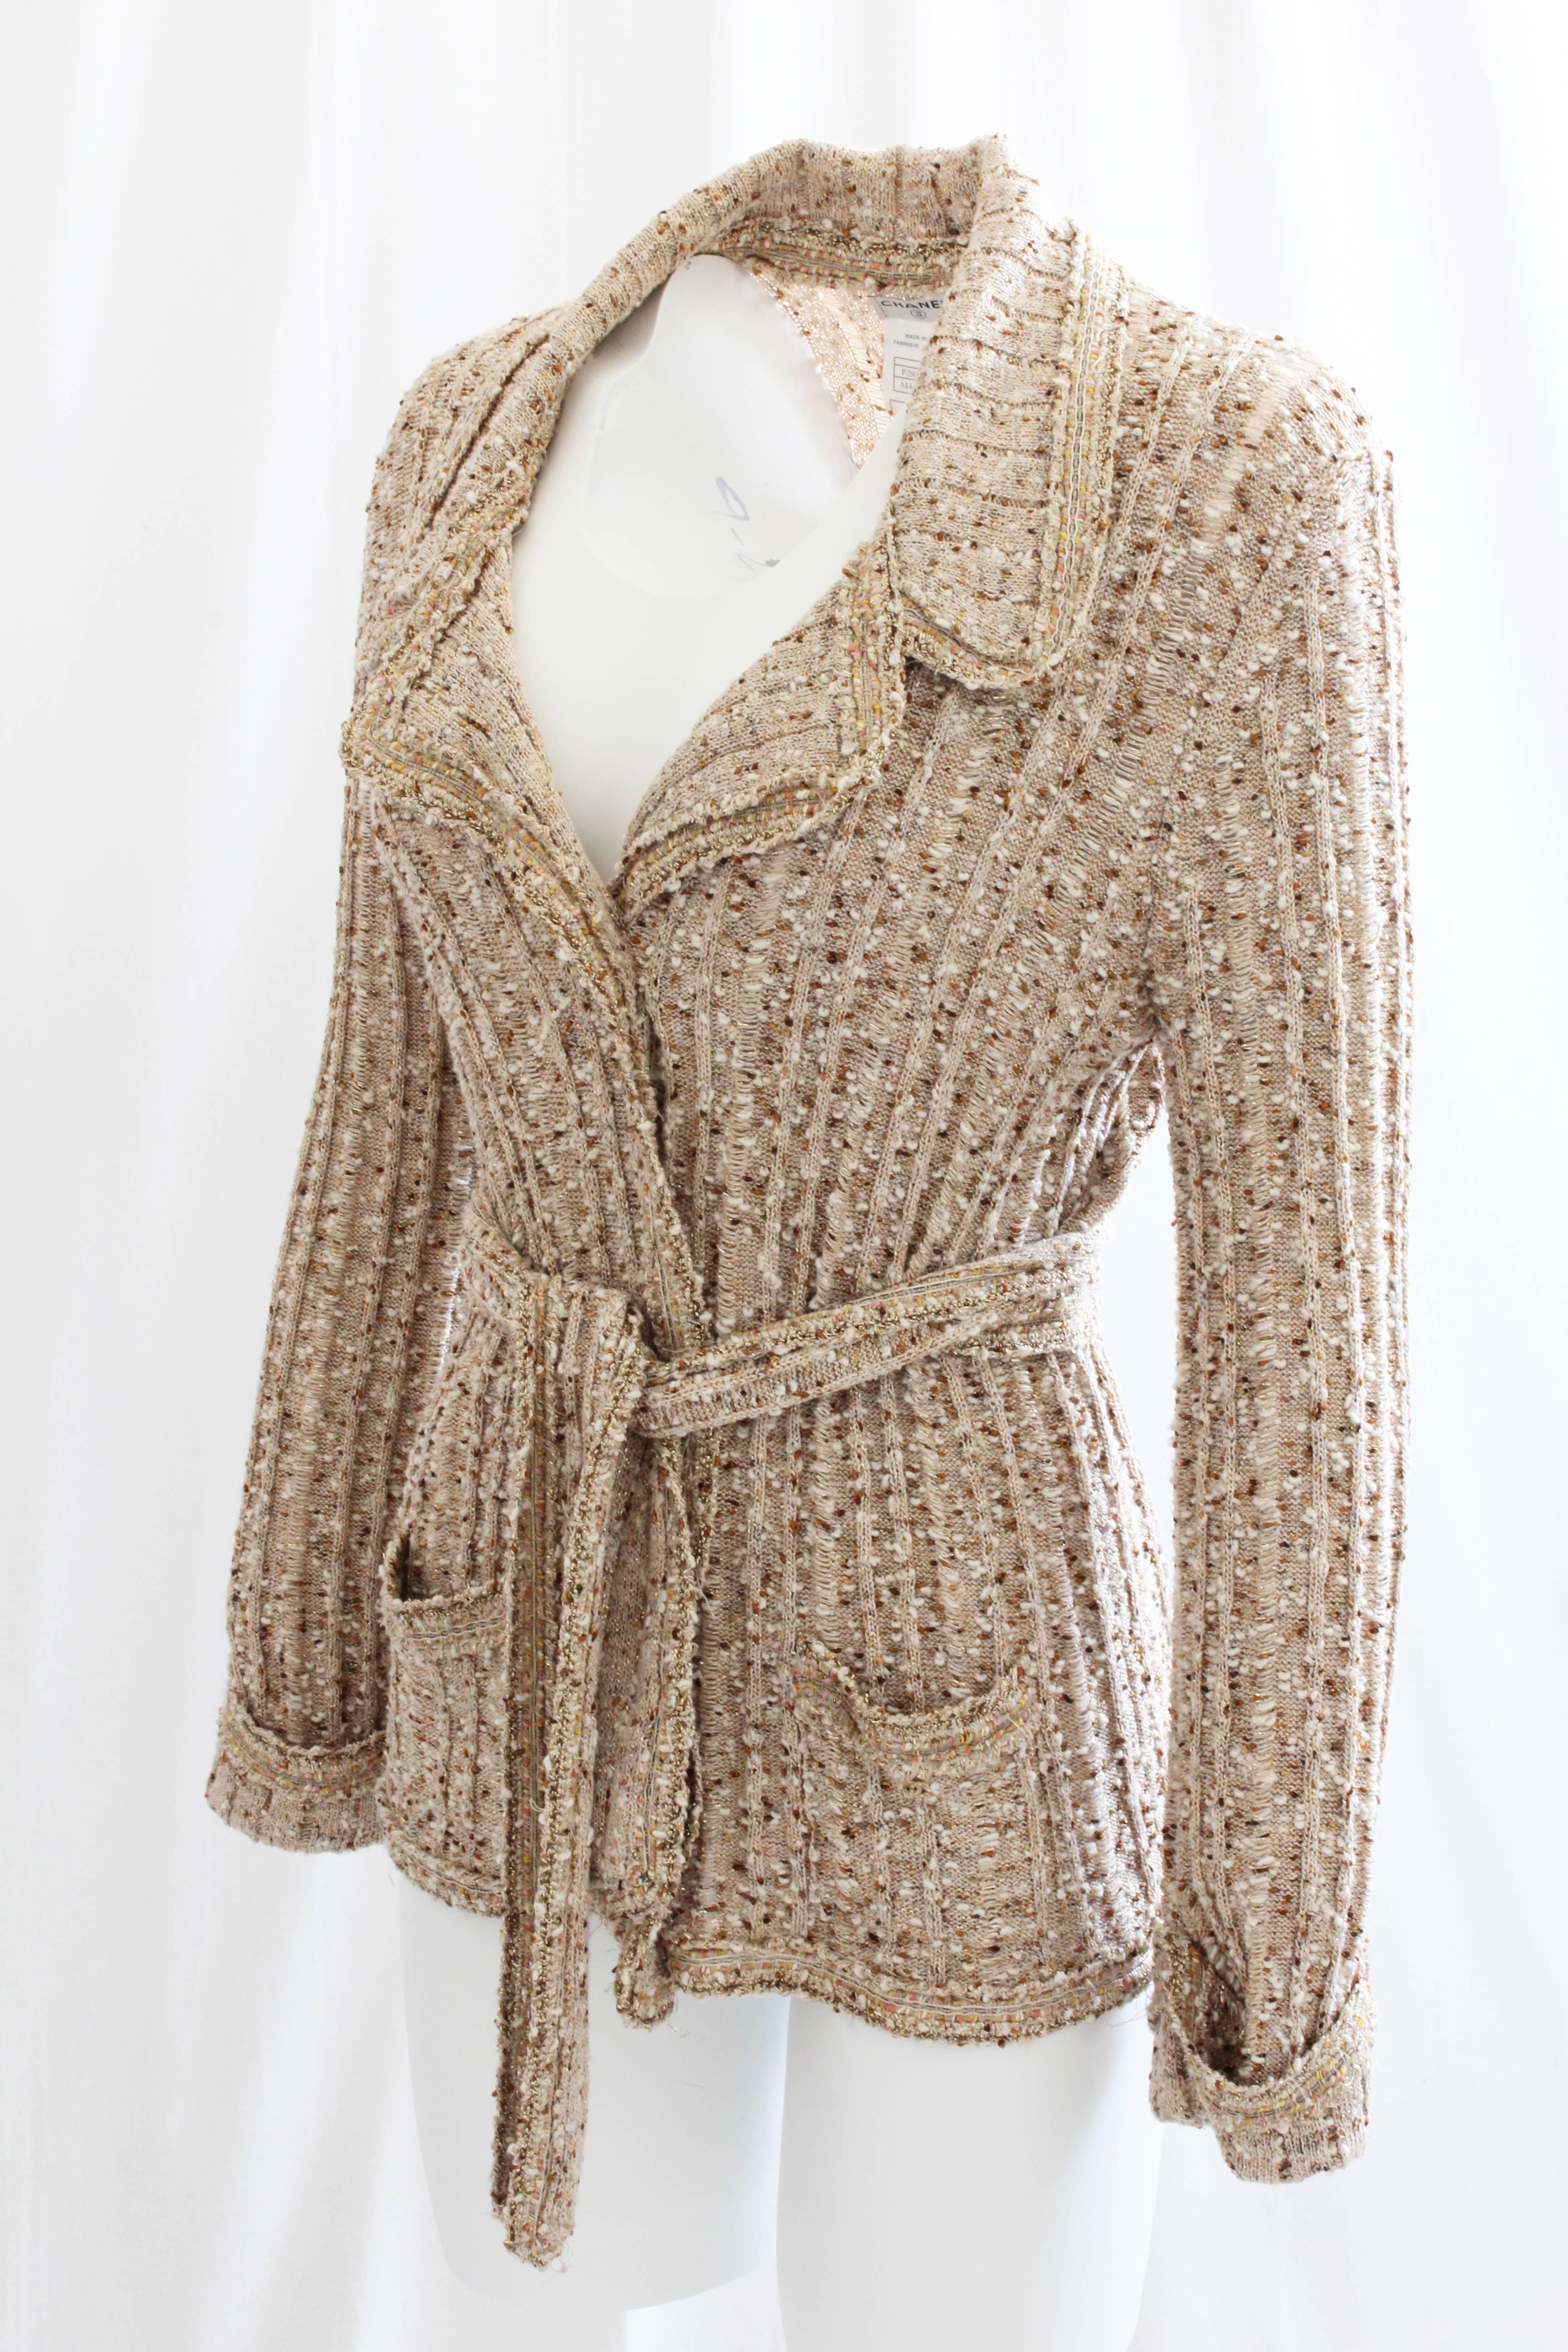 Brown Chanel Boucle Knit Cardigan Sweater with Belt Oatmeal Tan 06P Collection Sz 44